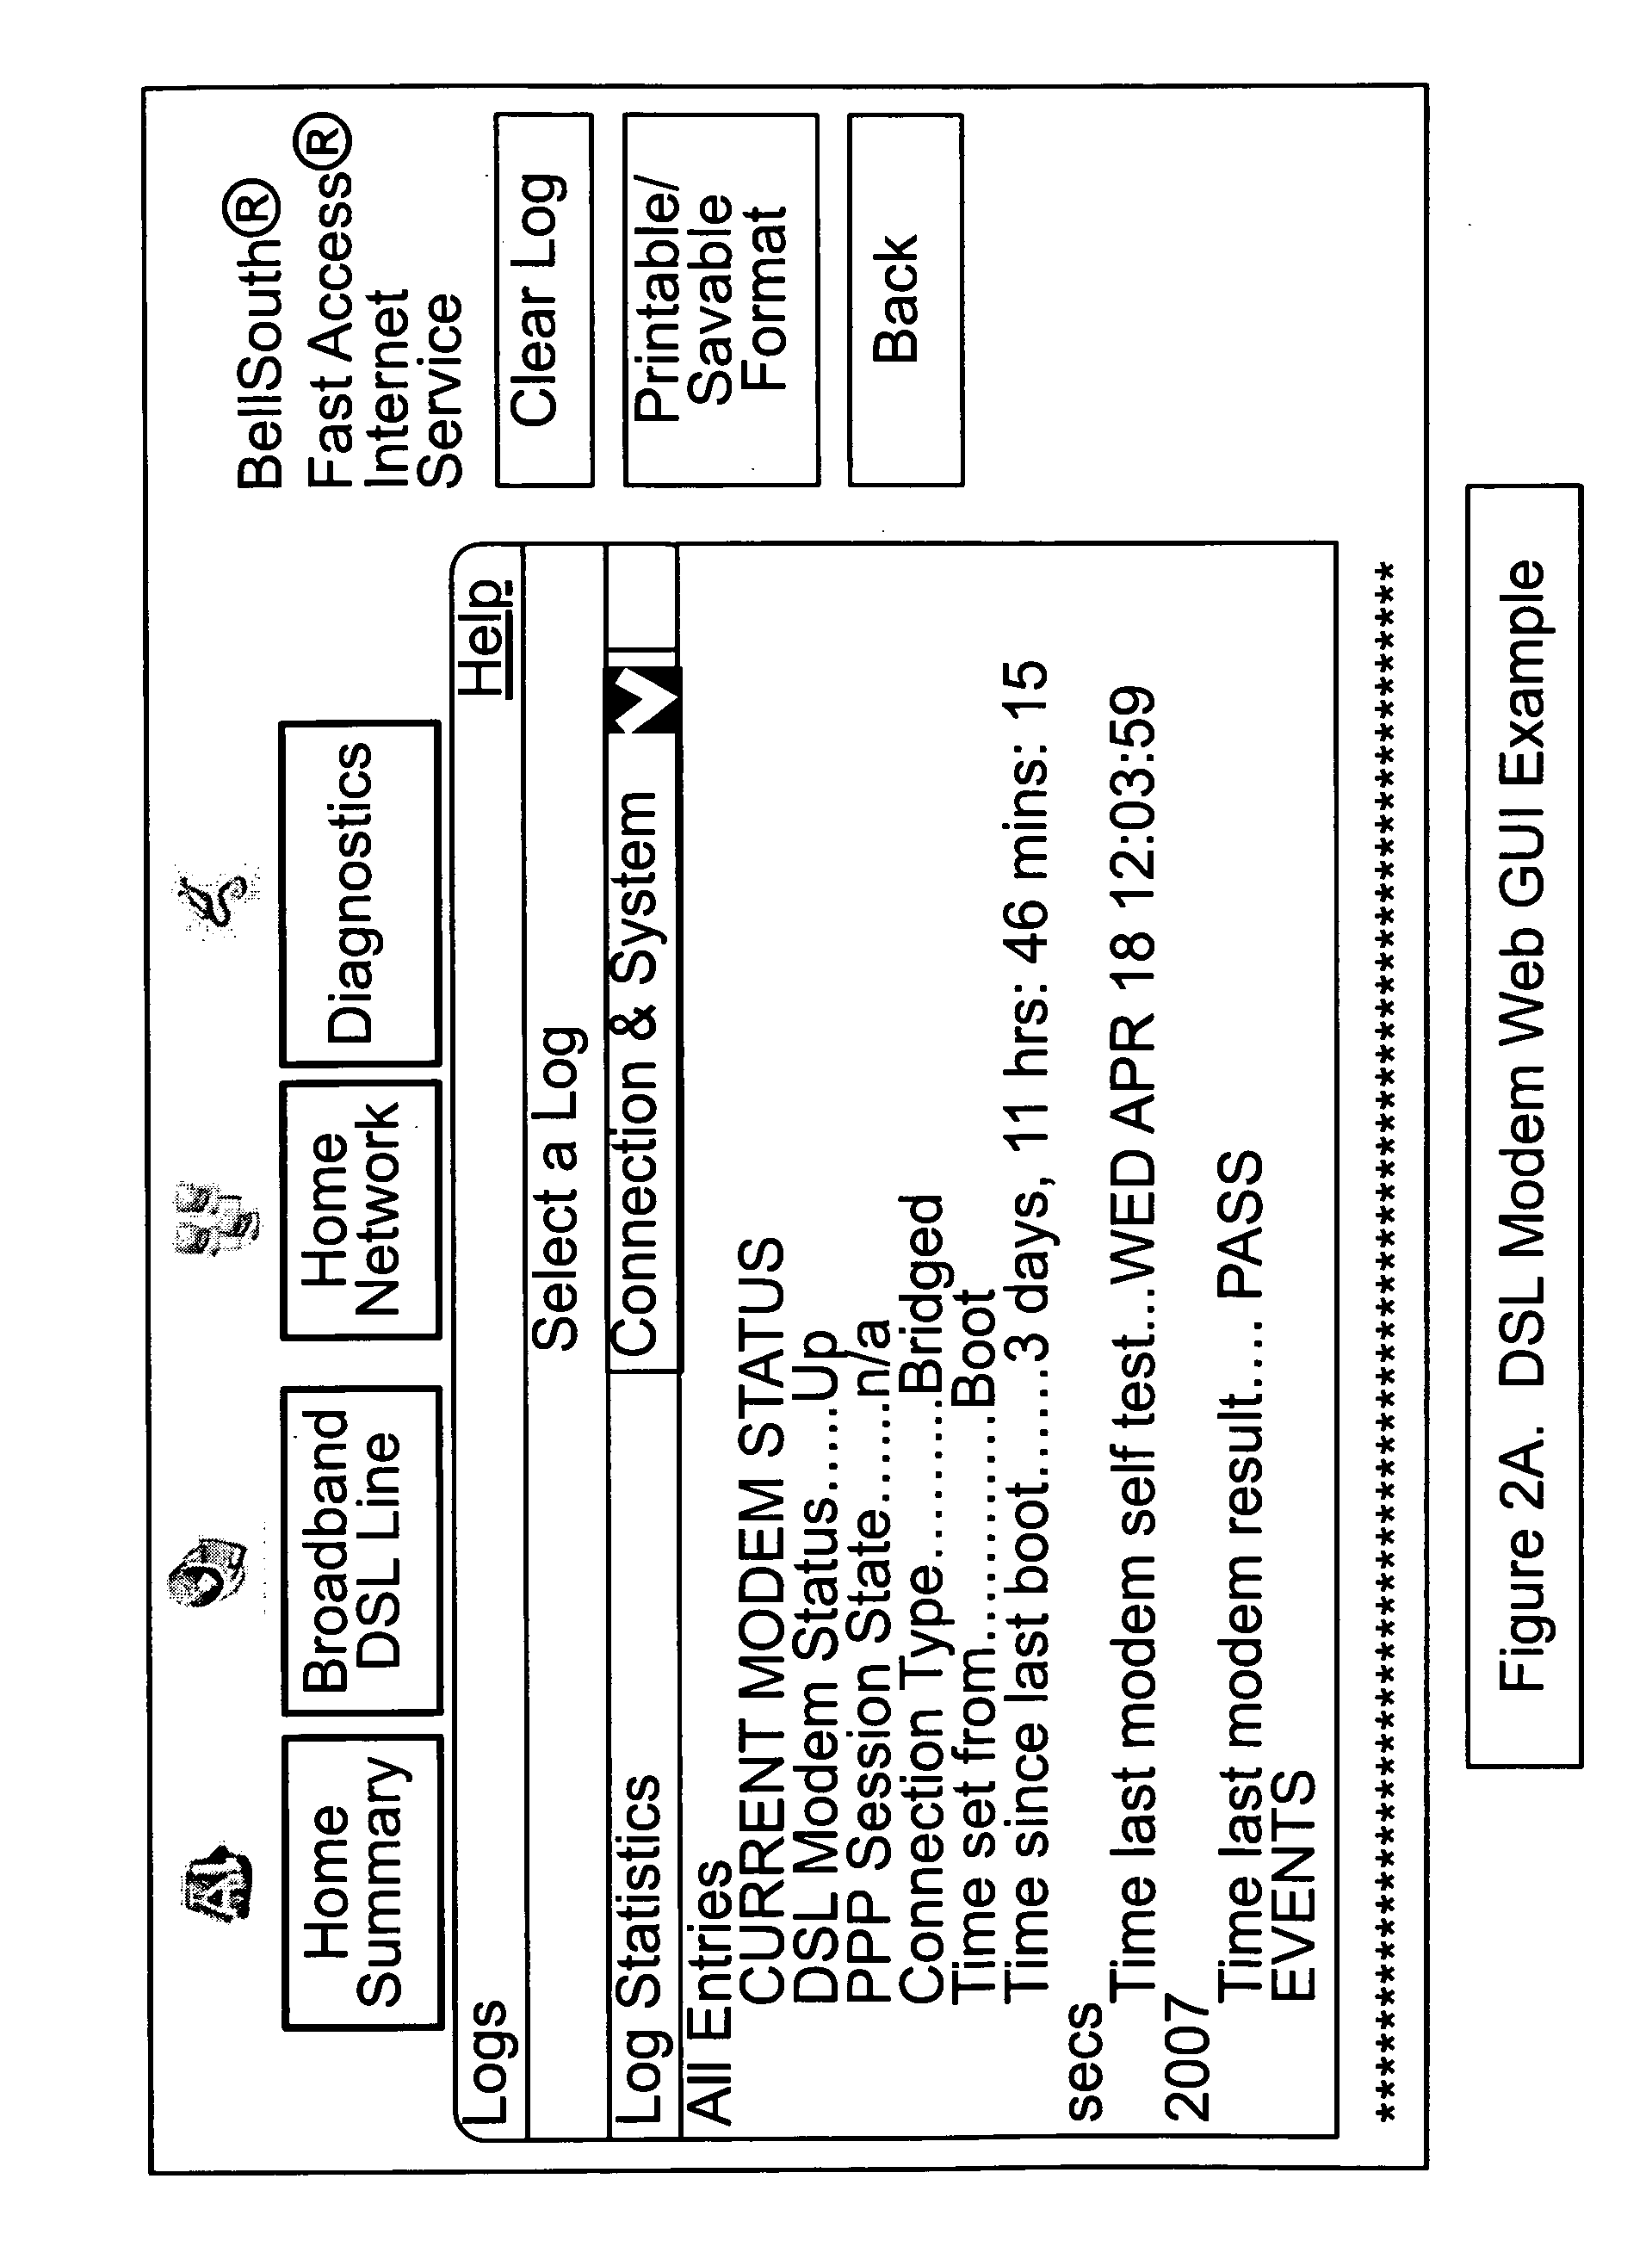 Systems, devices, agents and methods for monitoring and automatic reboot and restoration of computers, local area networks, wireless access points, modems and other hardware